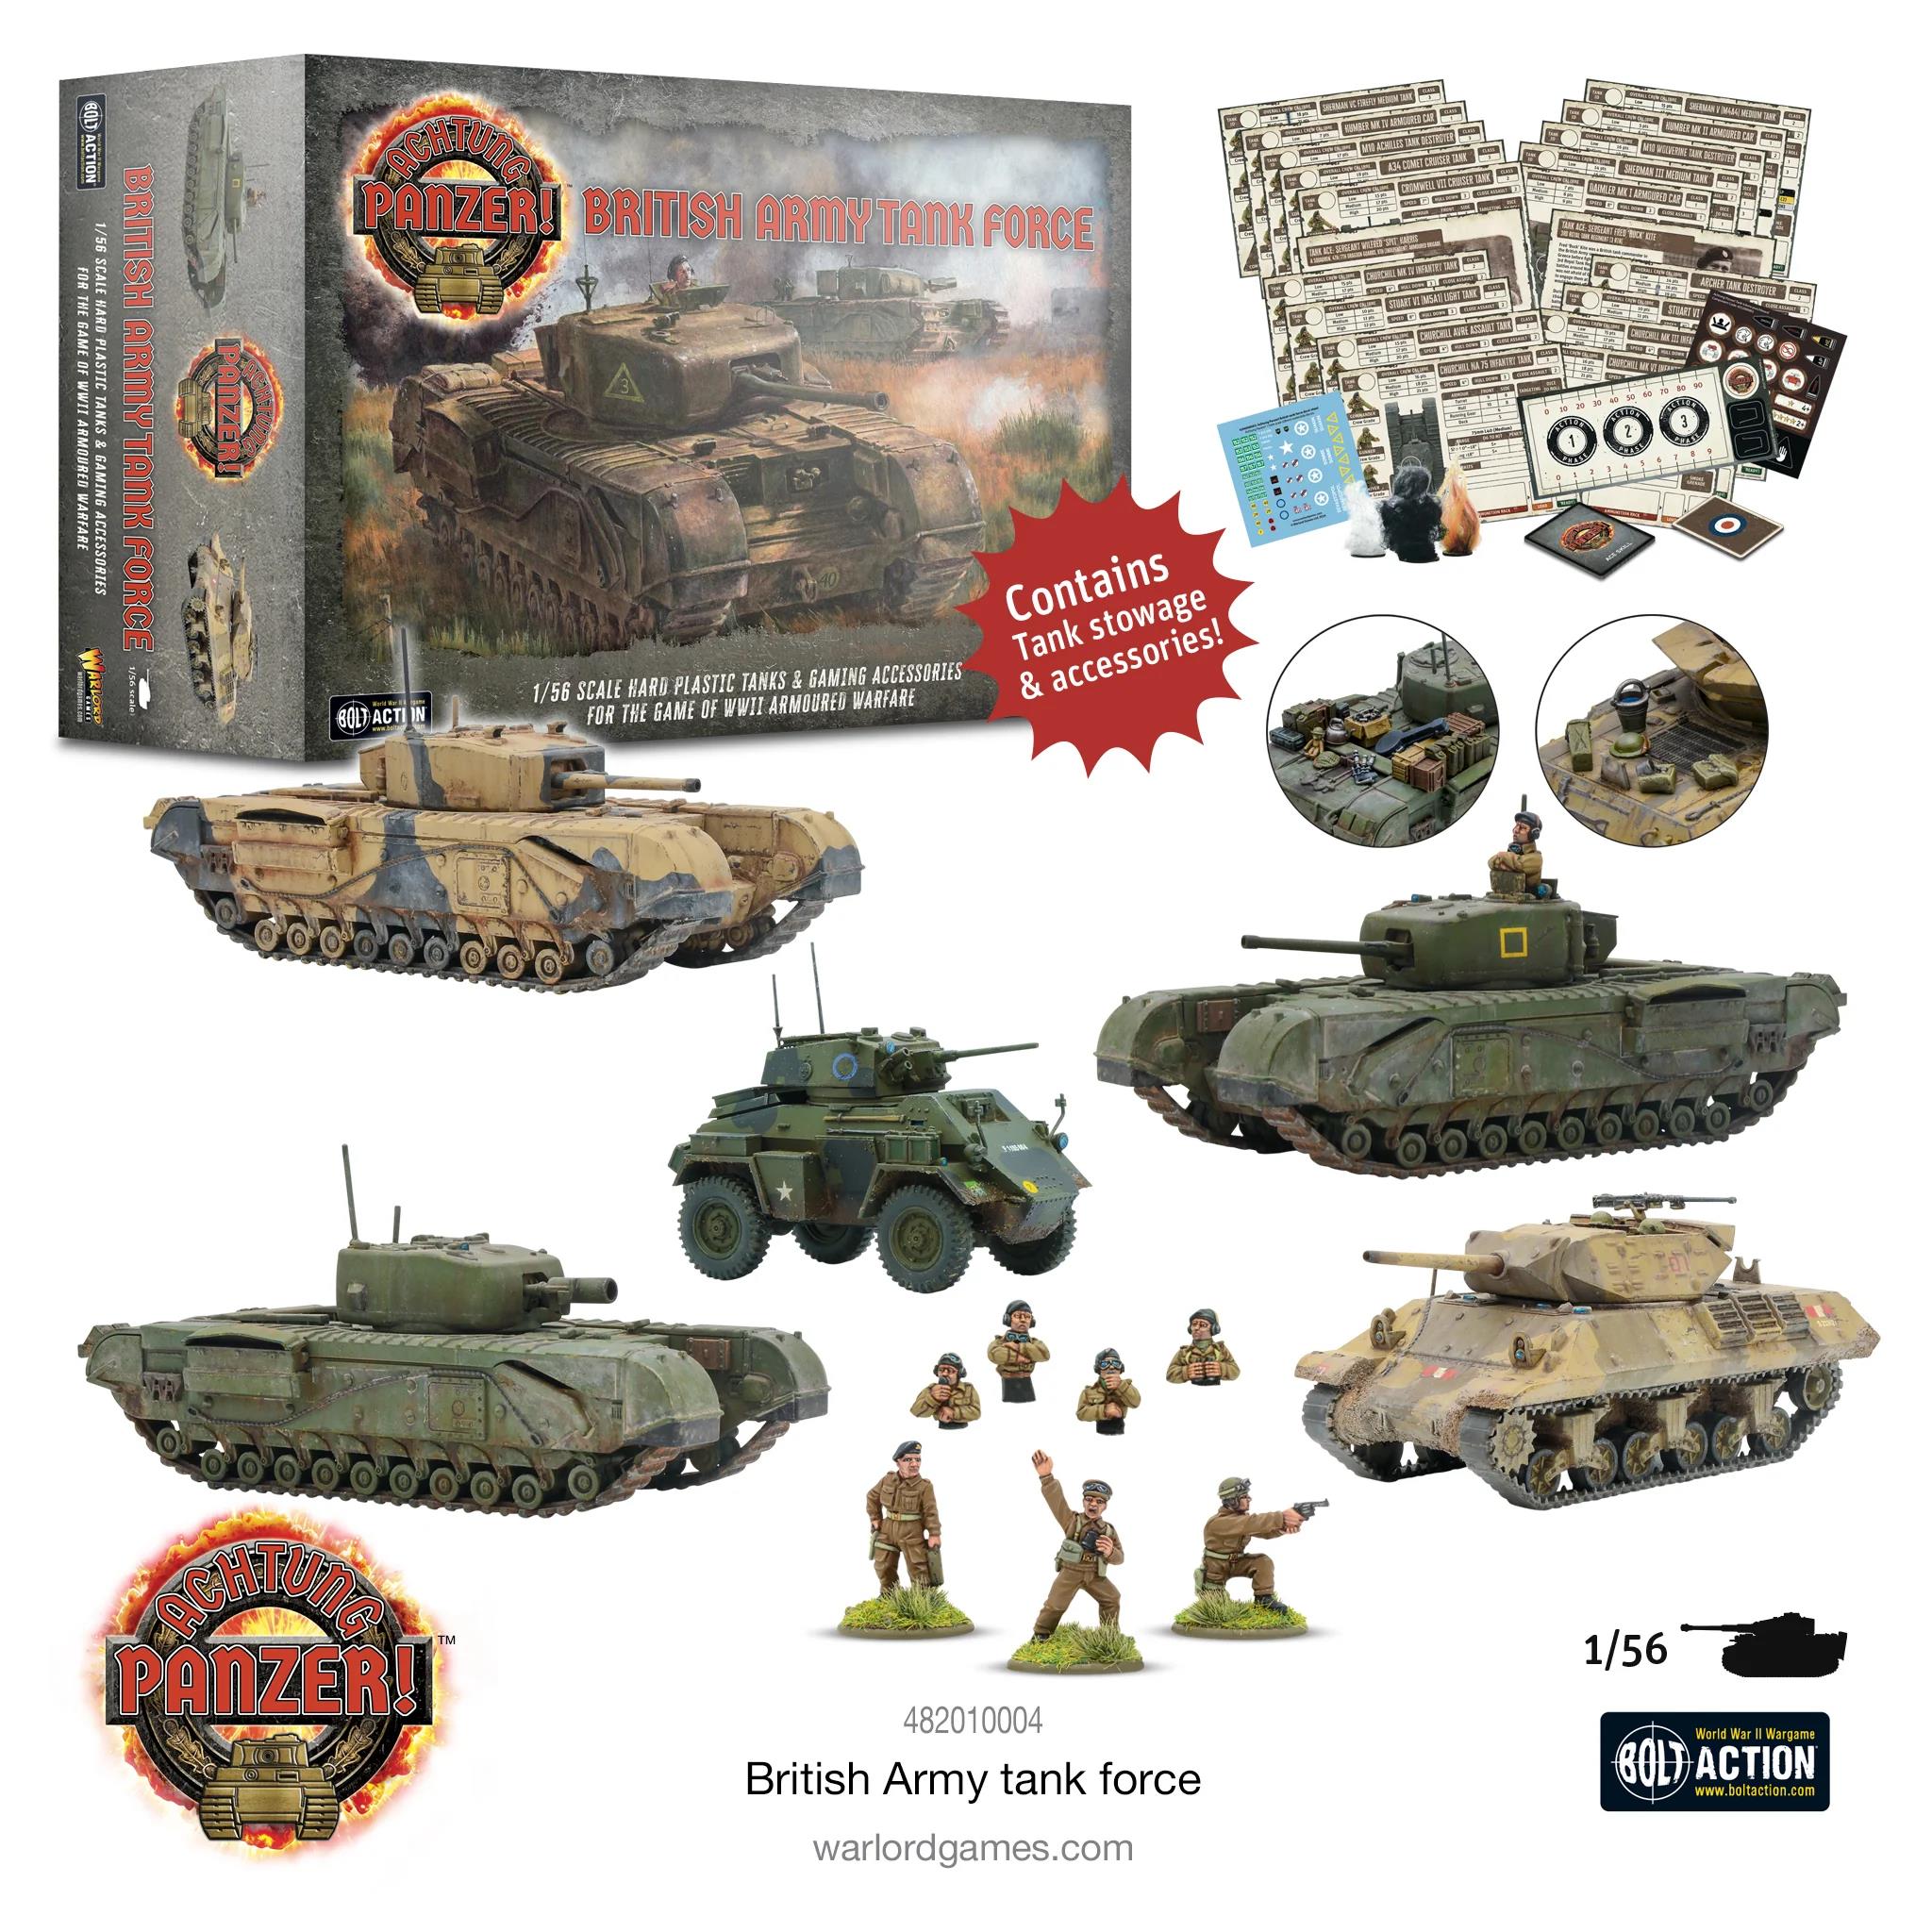 Achtung Panzer: British Army Tank Force